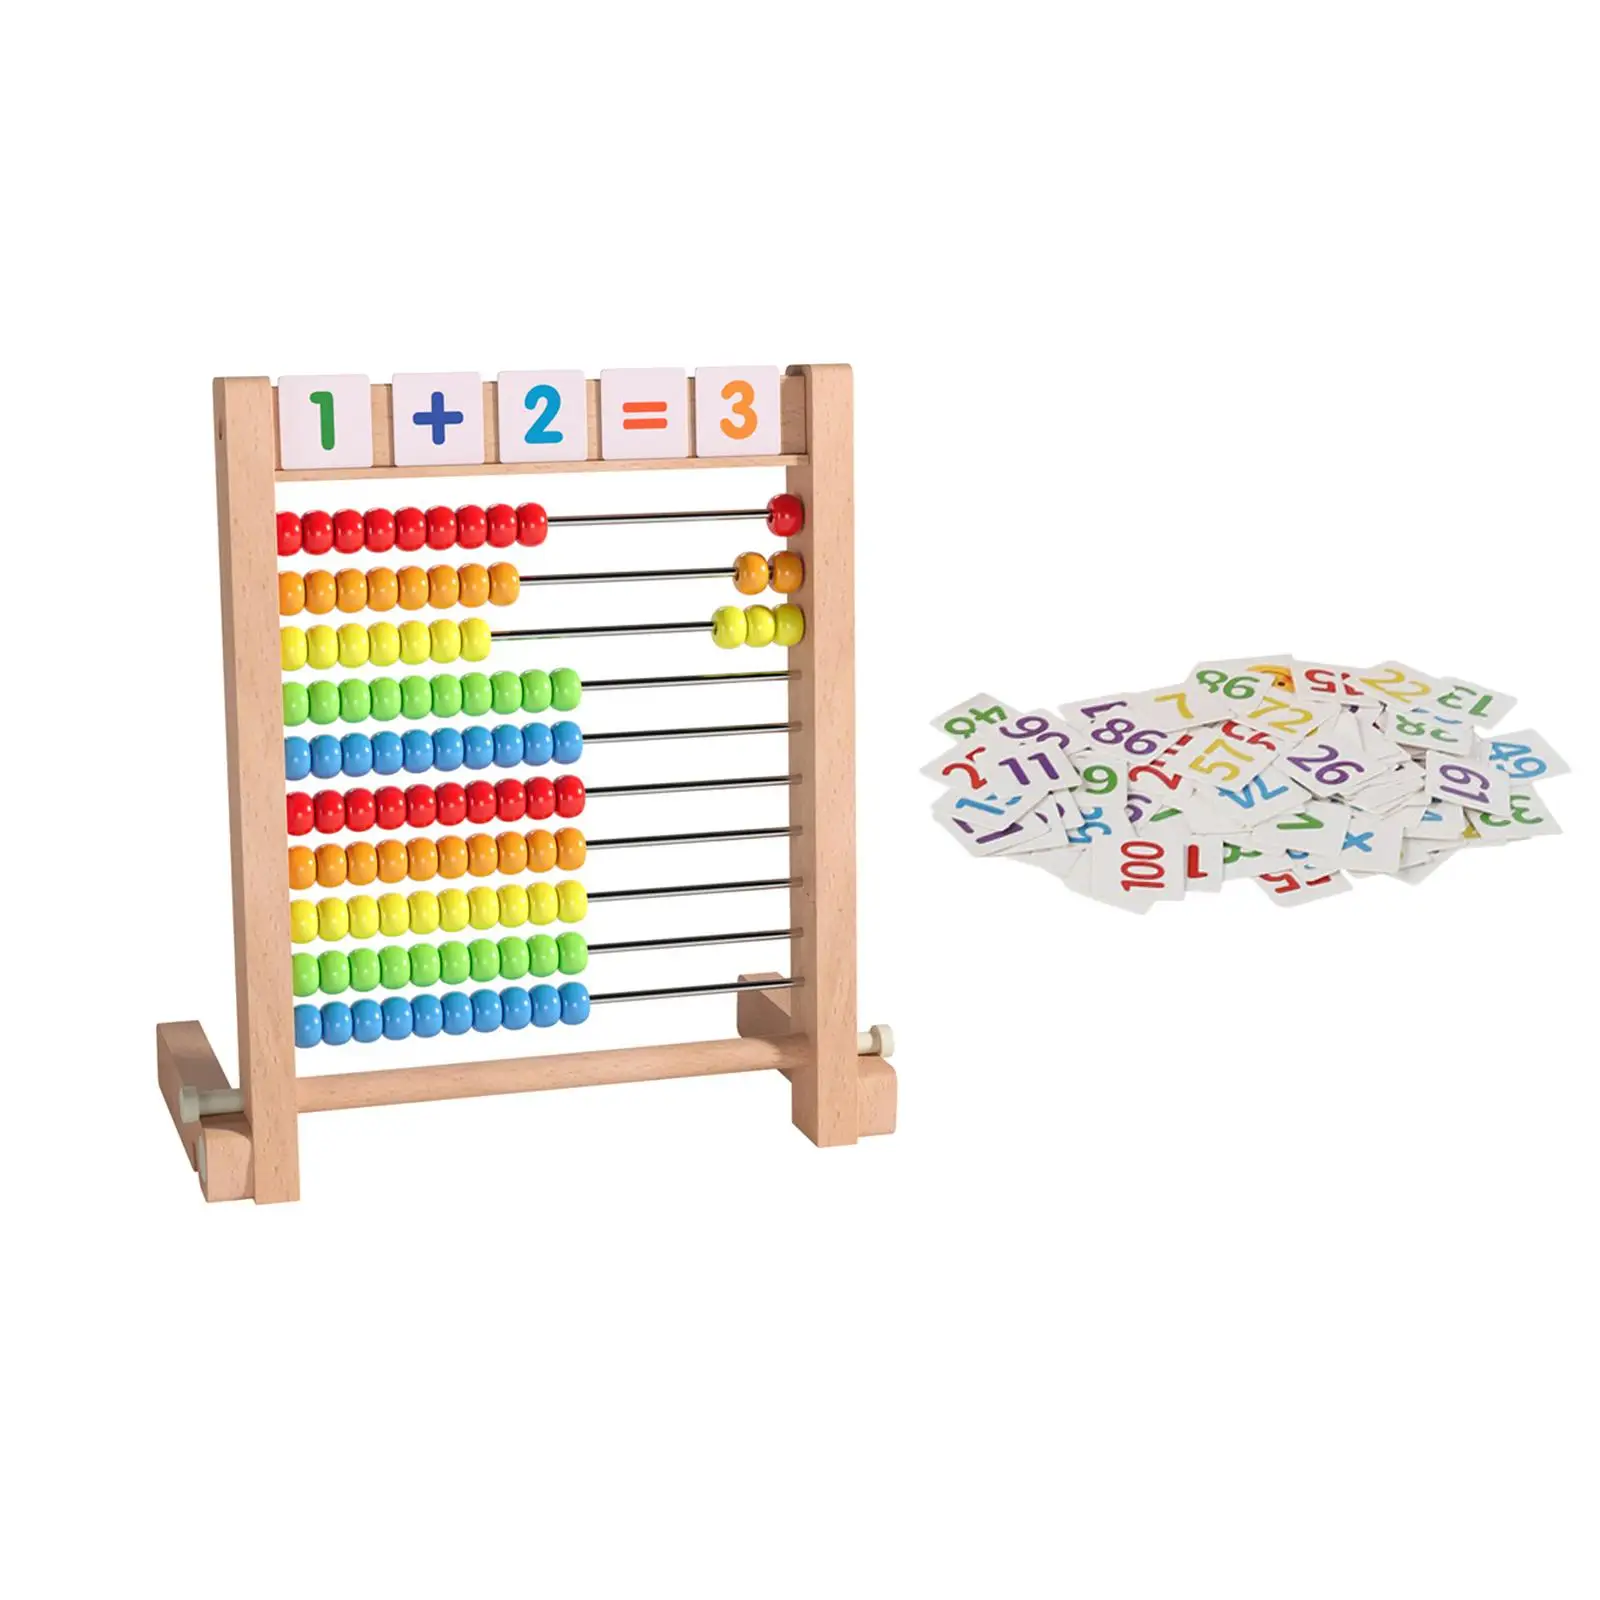 Add Subtract Abacus Ten Frame Set Educational Counting Frames Toy Montessori for Boy Girls Toddlers Kindergarten Children Gifts